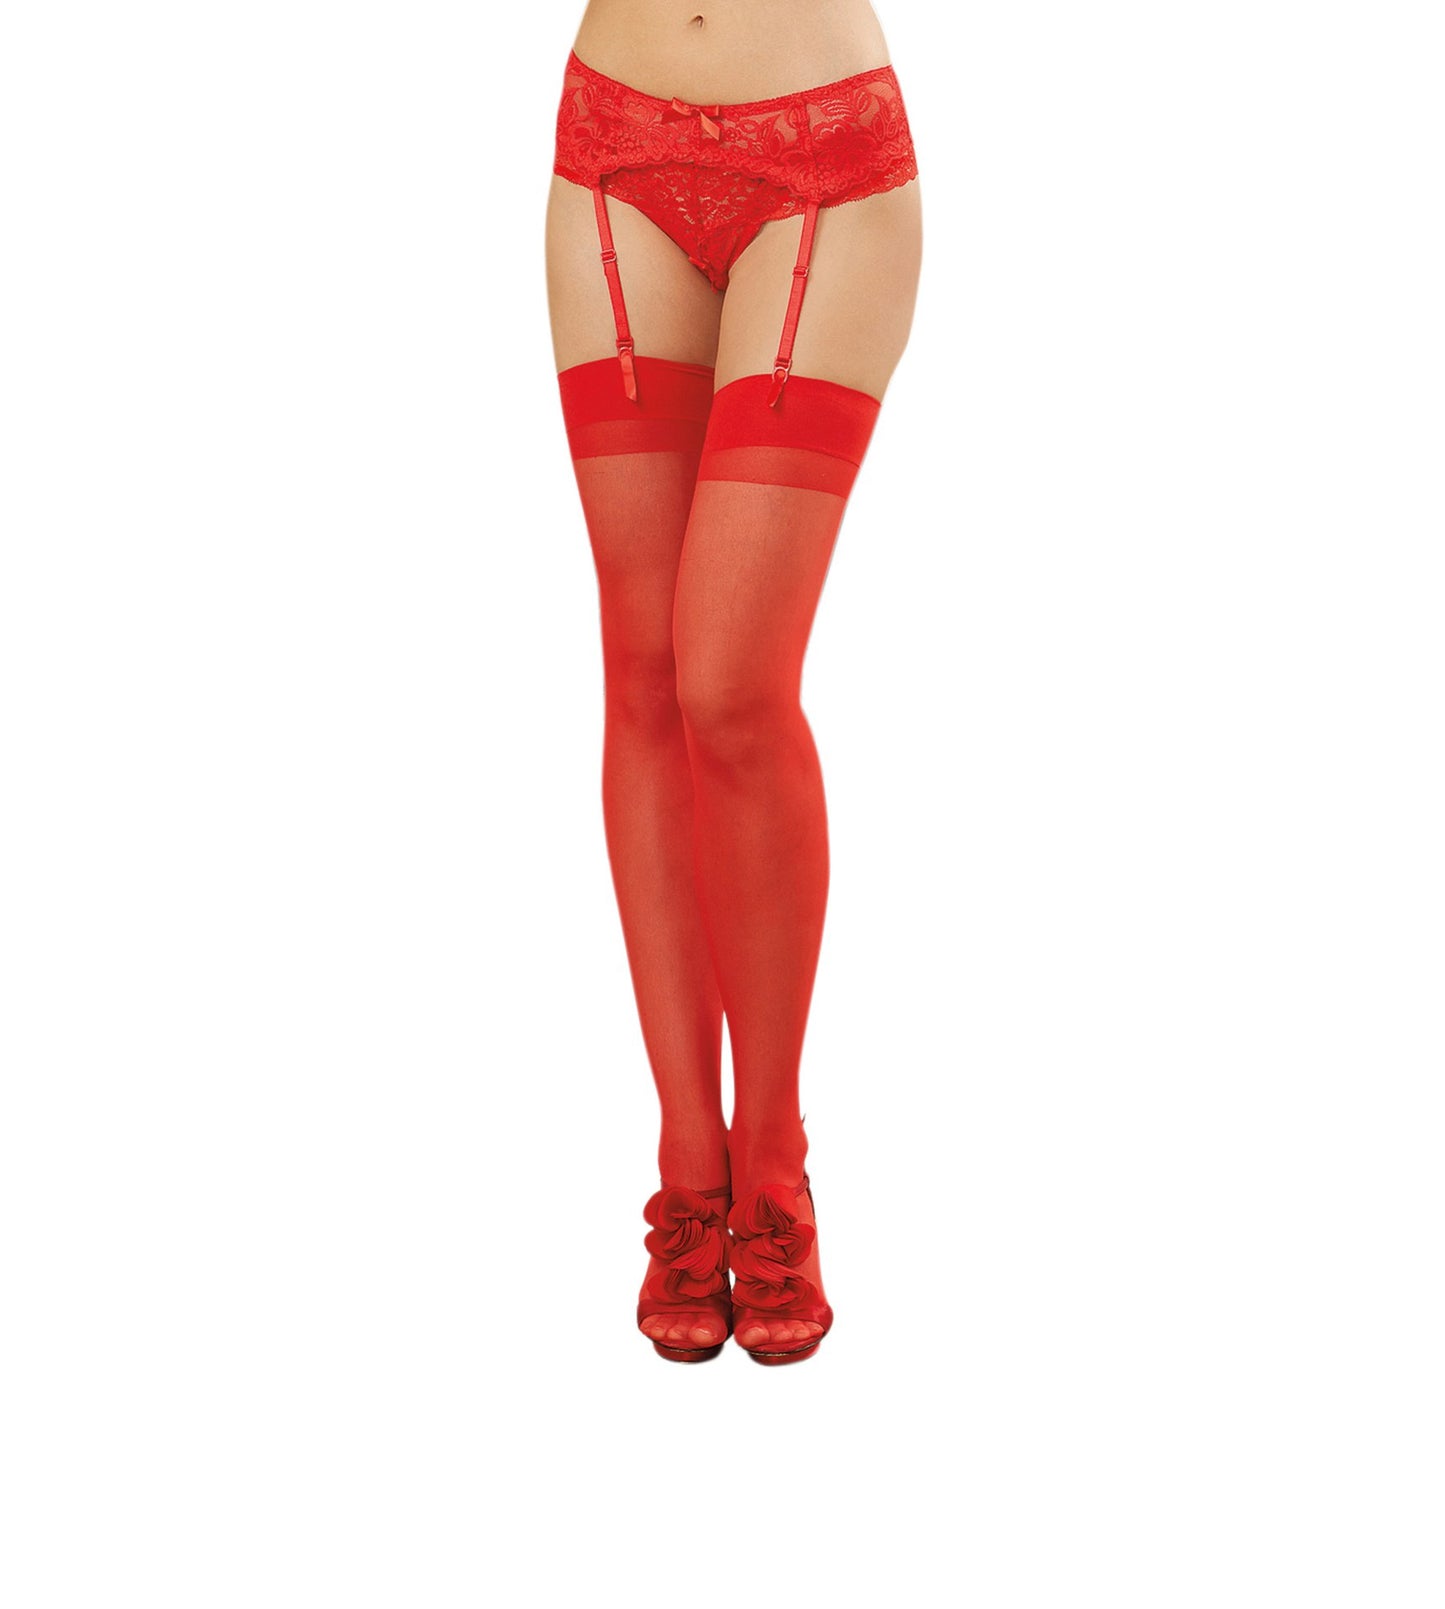 Sheer Thigh High - One Size - Red DG-0007REDOS